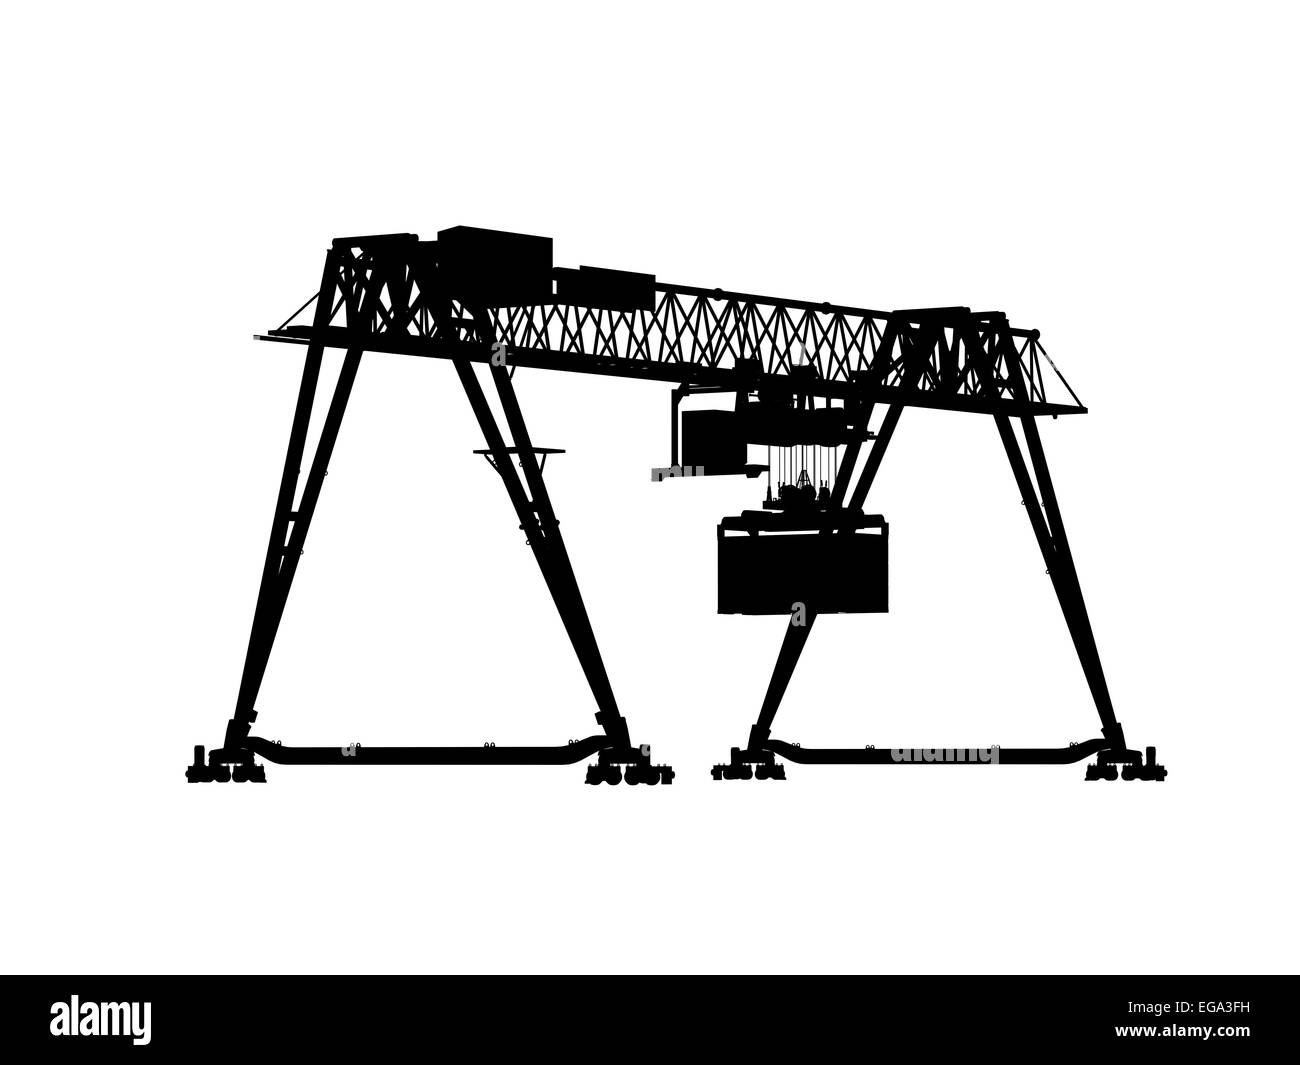 Container bridge gantry crane. Black silhouette isolated on white background. Render of 3d model, perspective view Stock Photo